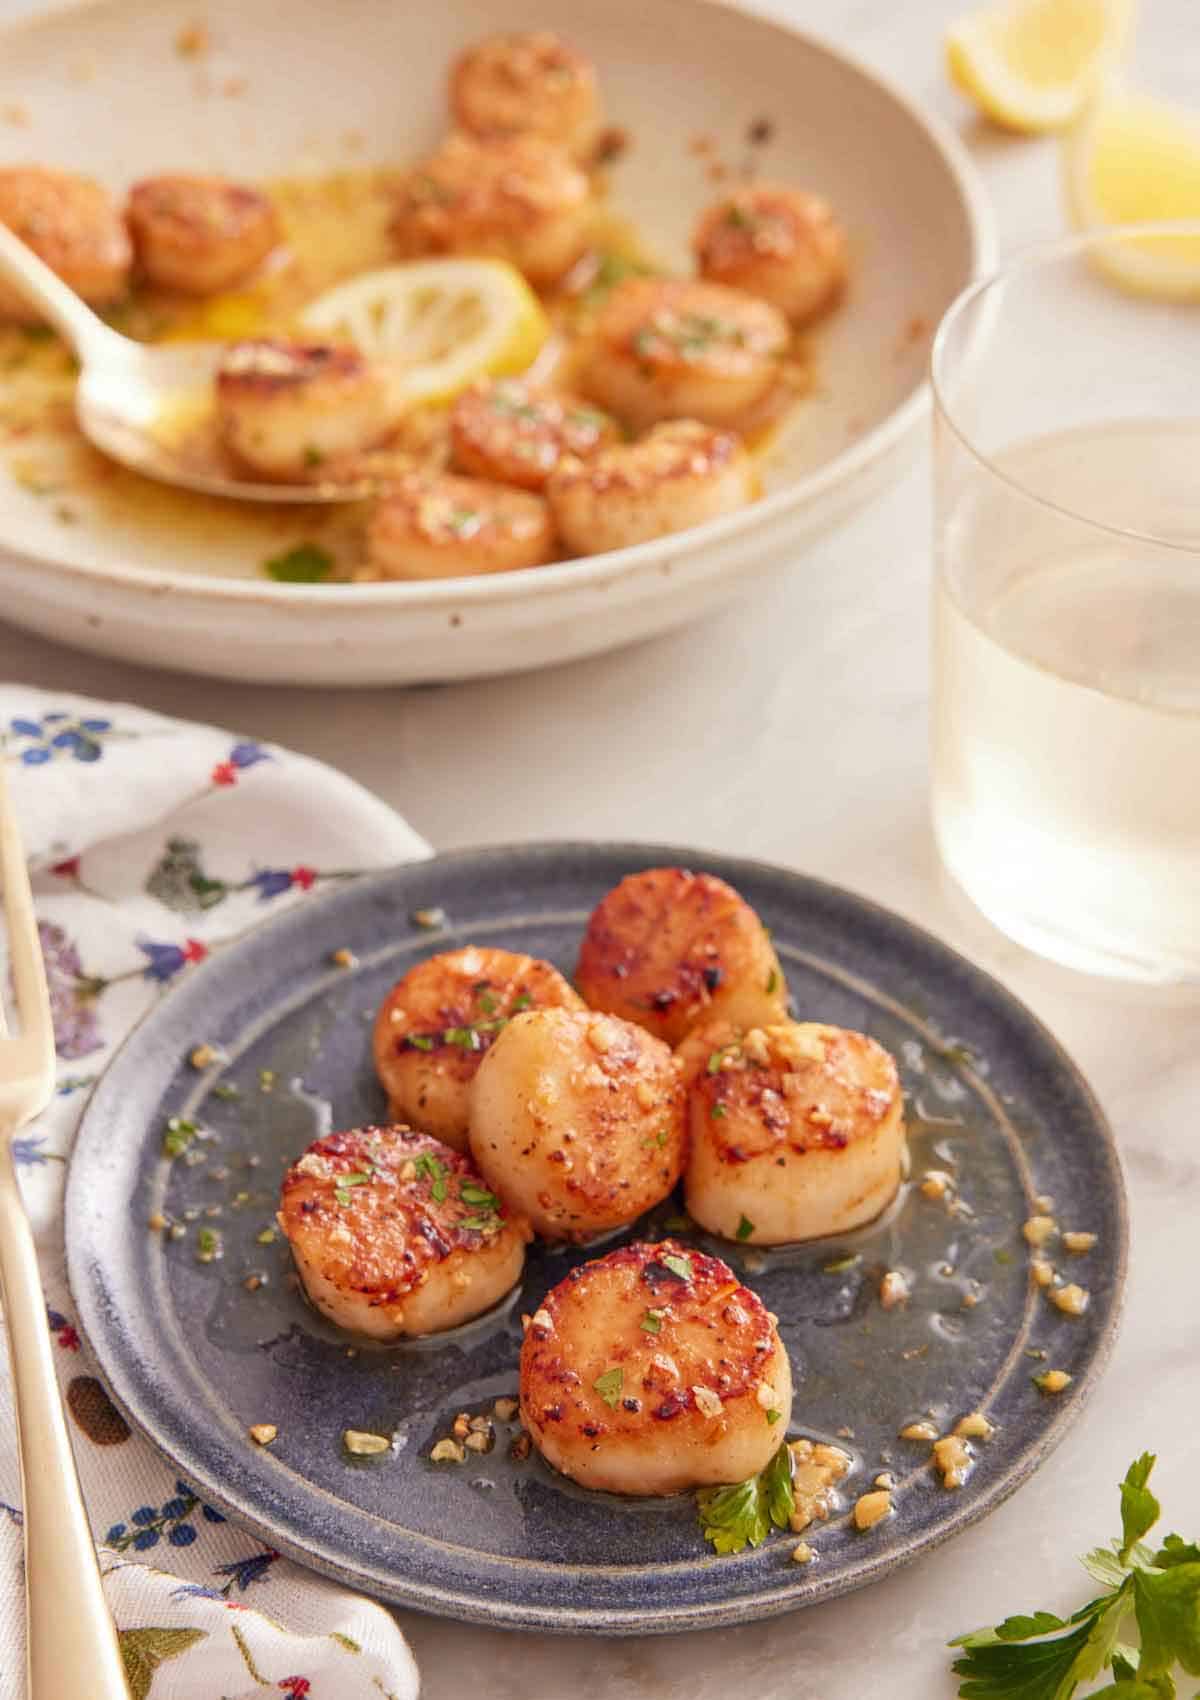 A plate with a serving of seared scallops with a glass of wine and the rest of the scallops in the background.